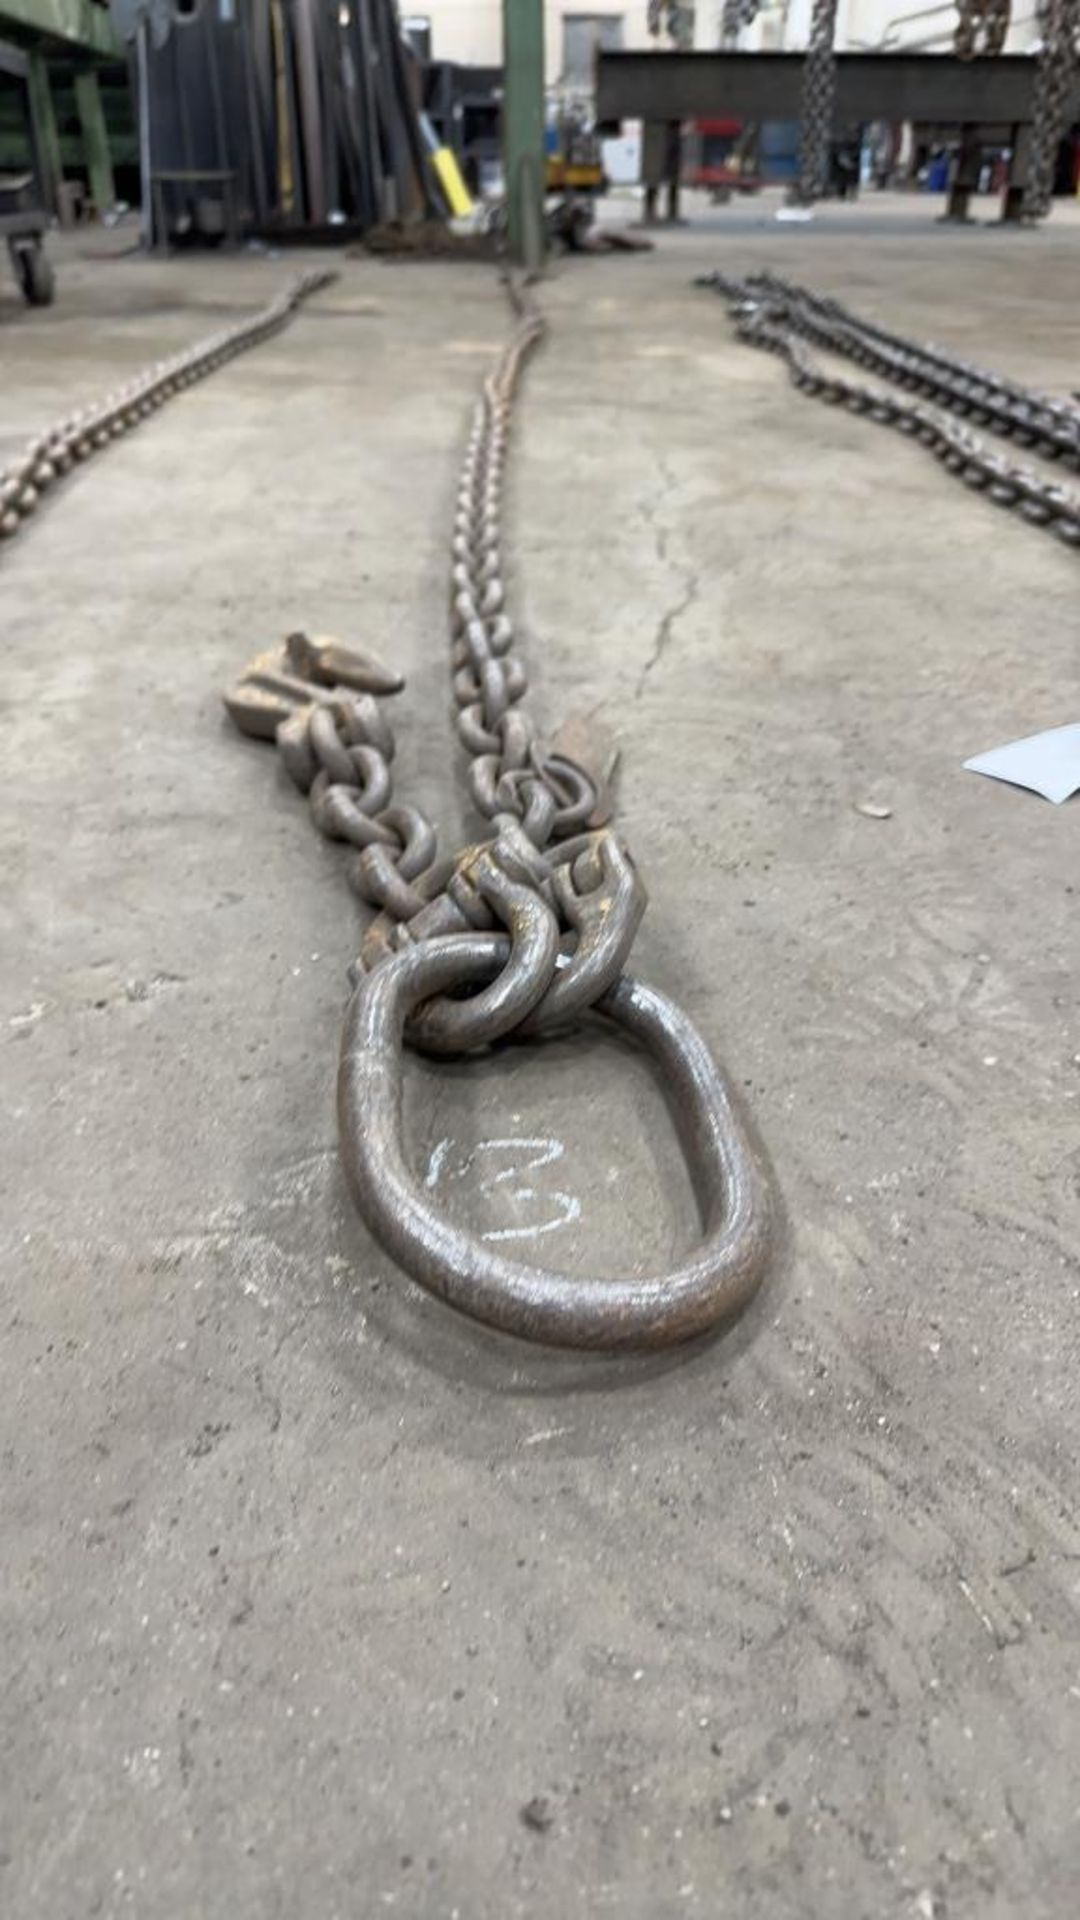 13ft Chain on Rigging Ring with Hoist Hooks